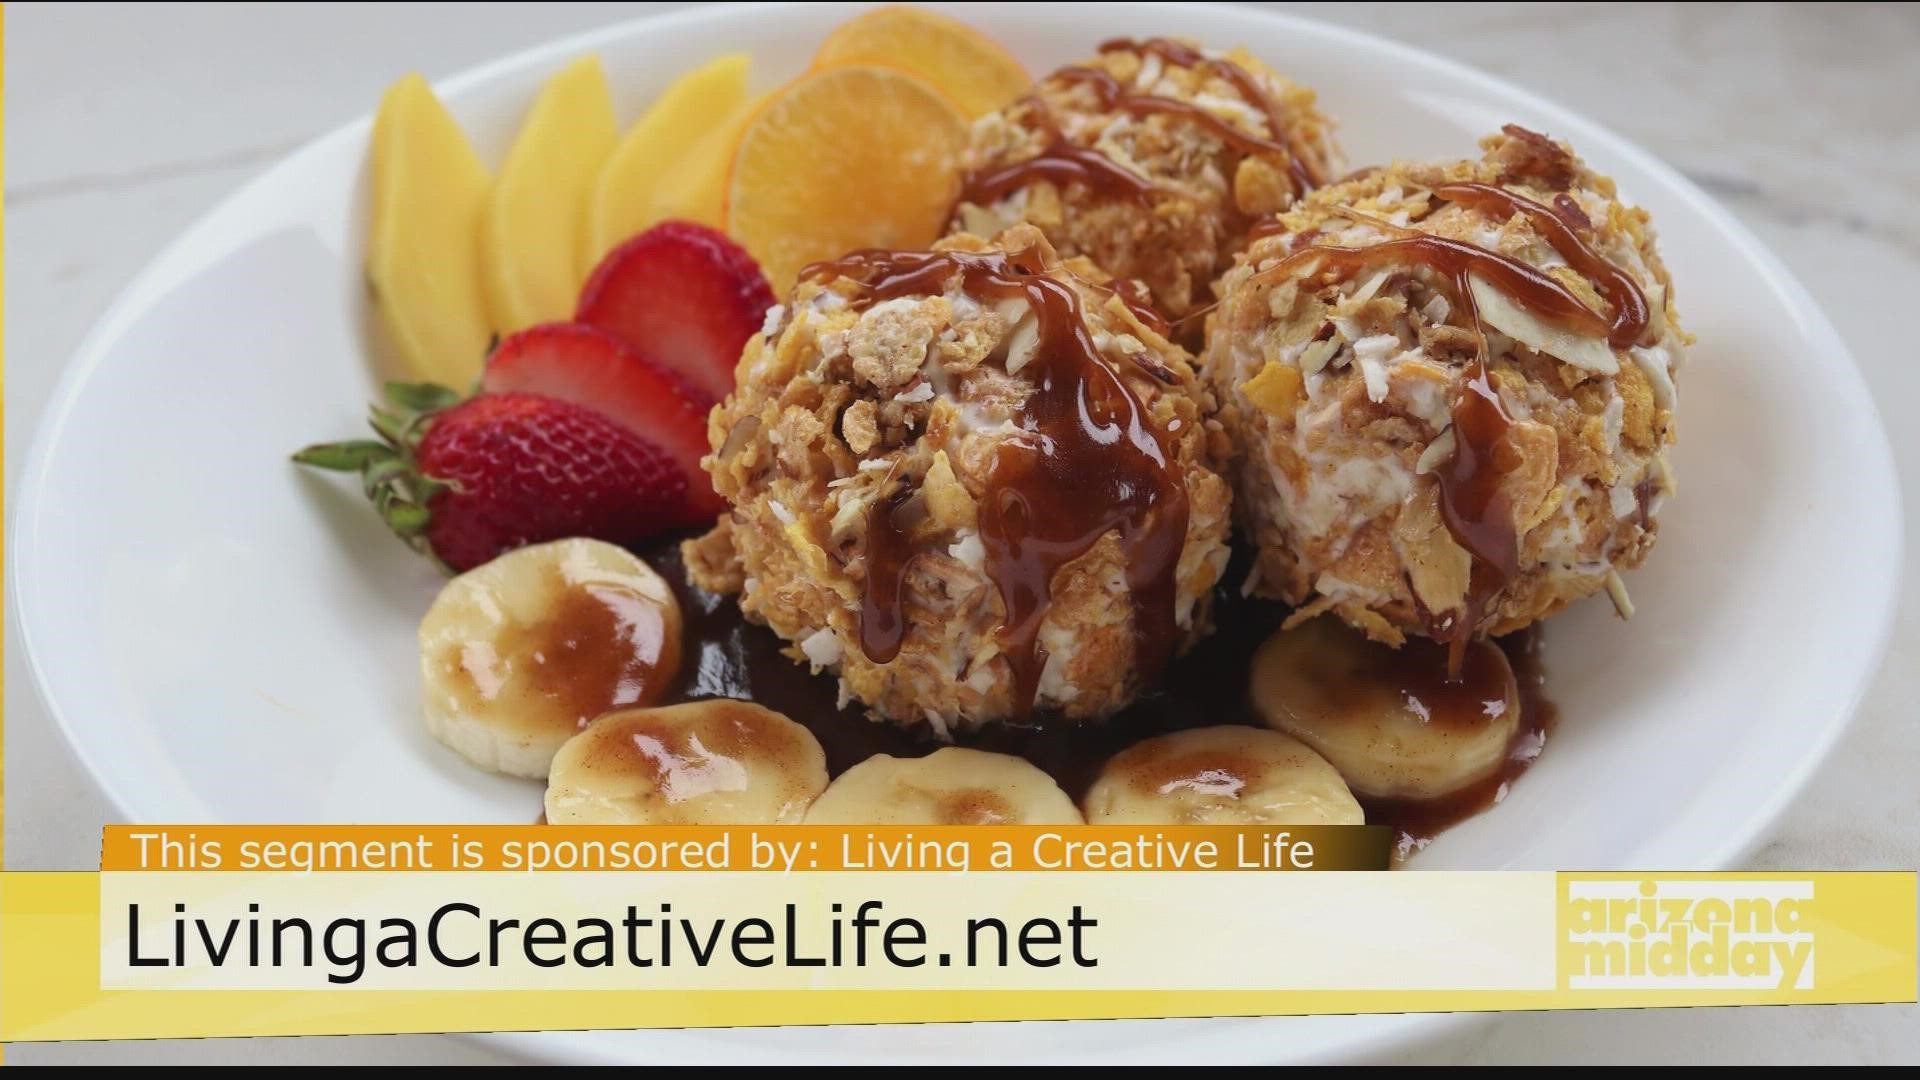 Suzanne Clark with Living a Creative Life offers an easy way to get the crunchy exterior of Mexican Fried Ice Cream without the frying.